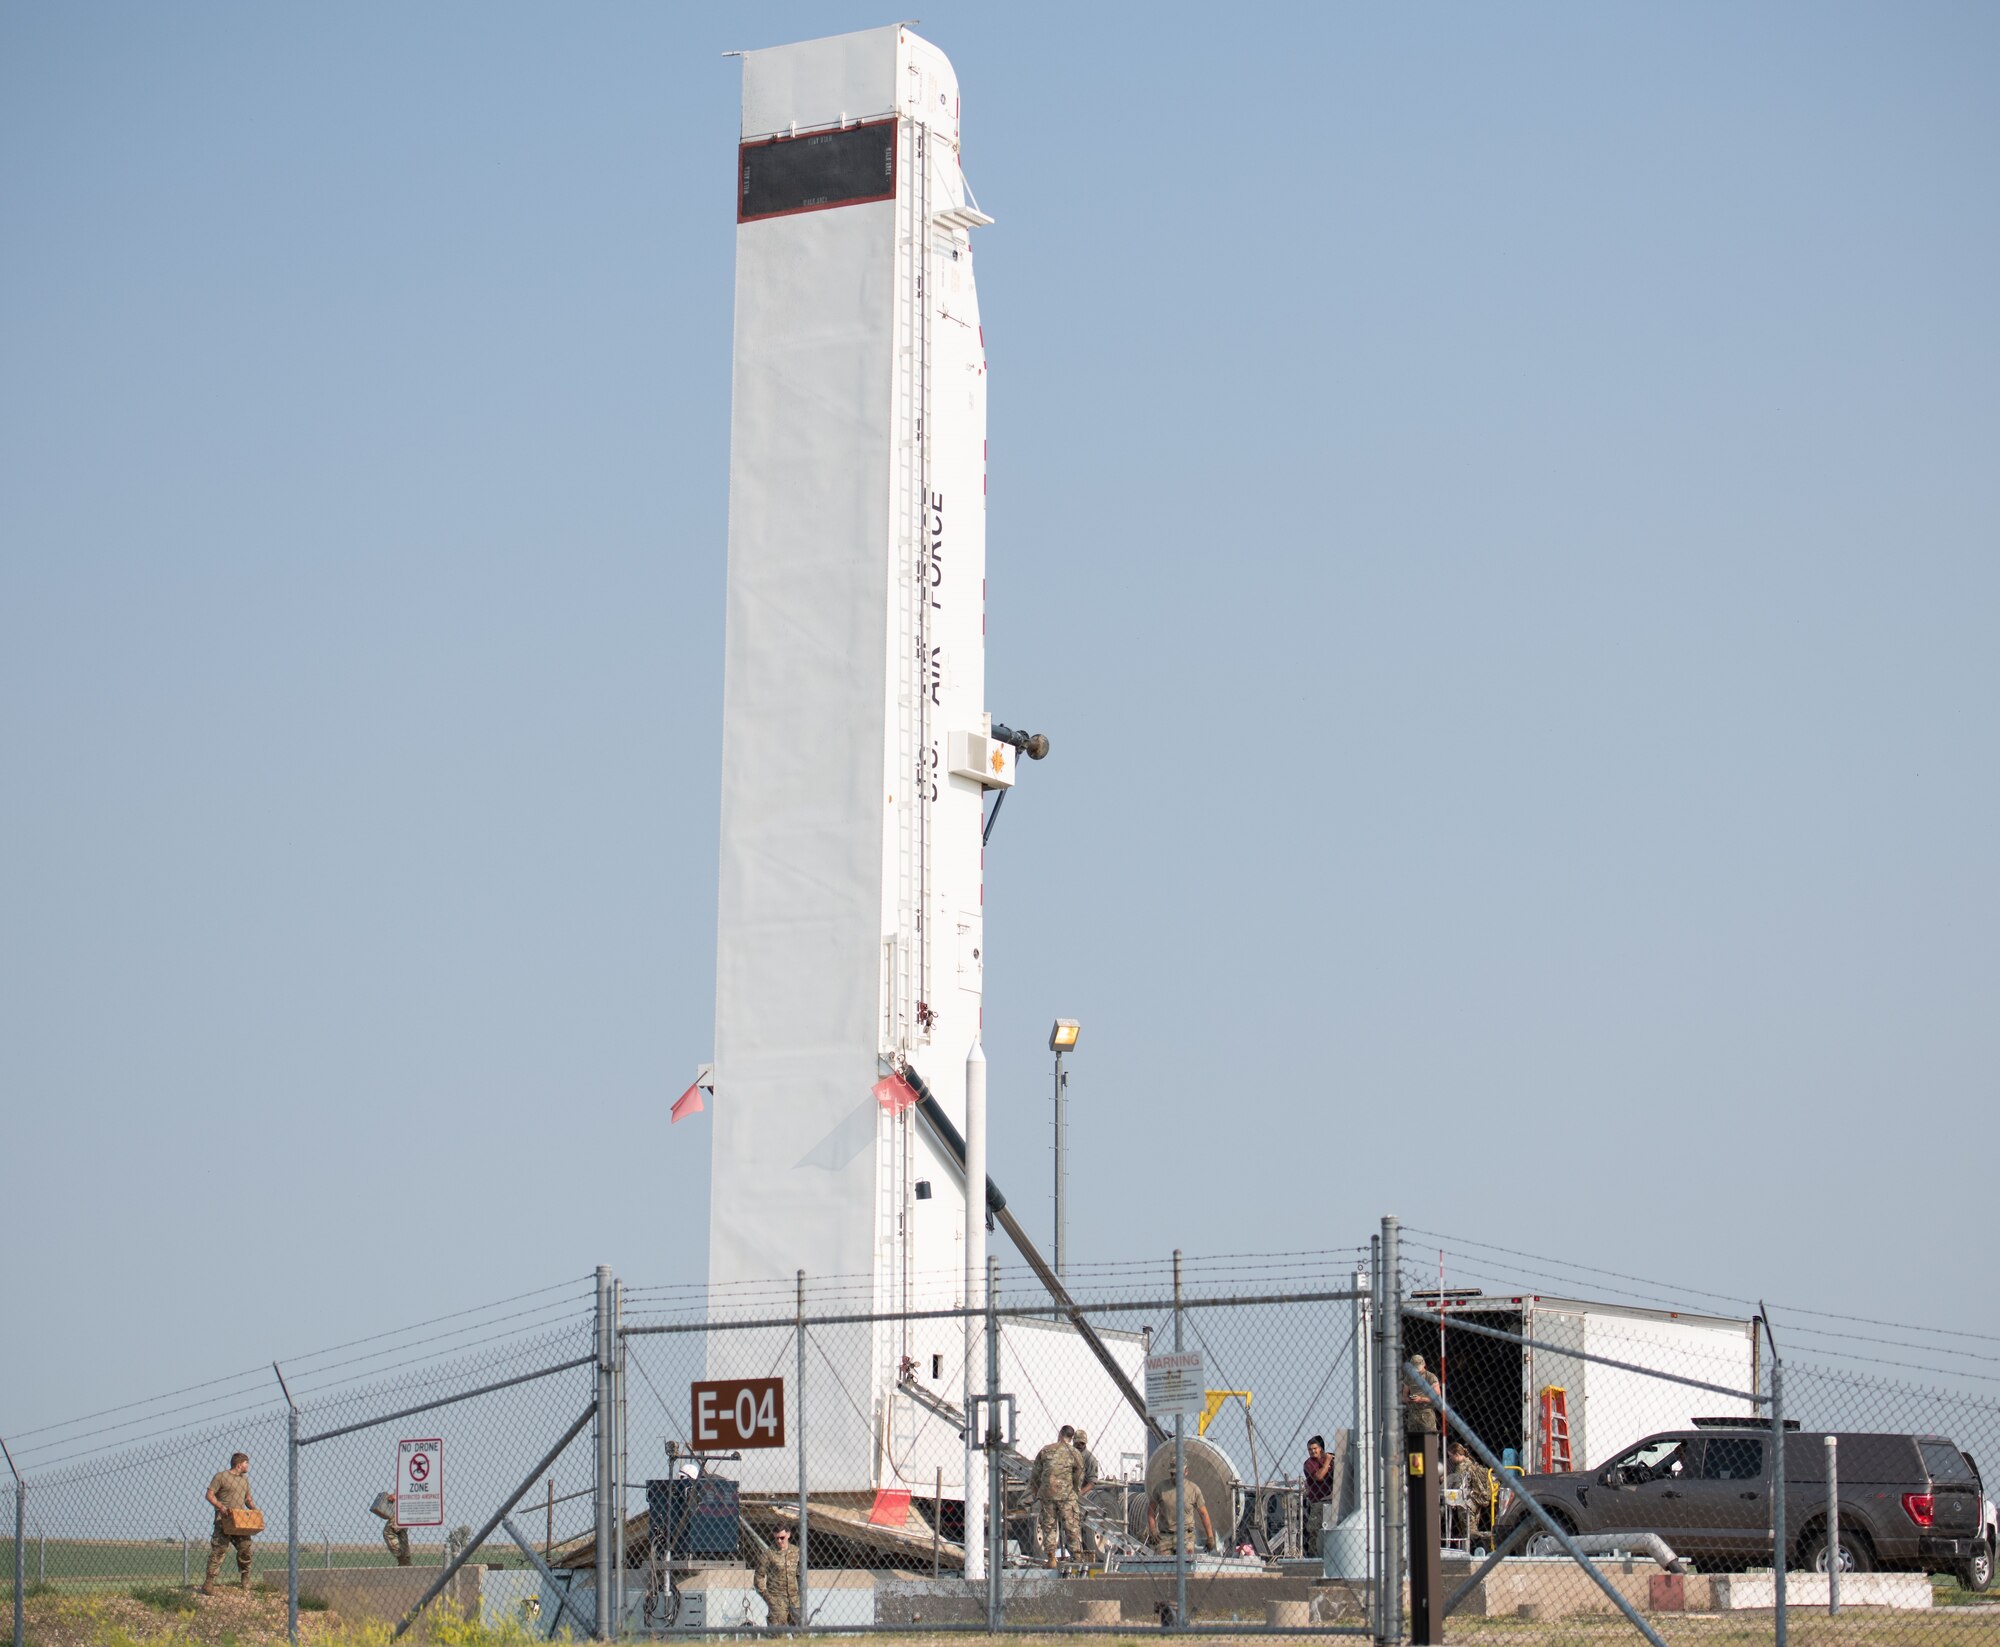 Airmen from the 91st Missile Maintenance Squadron raise a transport erector to its full height at Minot Air Force Base, North Dakota, July 10, 2023. The Airmen used the transport erector to lower an intercontinental ballistic missile III into a missile silo as part of Operation Bullystick. (U.S. Air Force photo by Airman 1st Class Trust Tate)